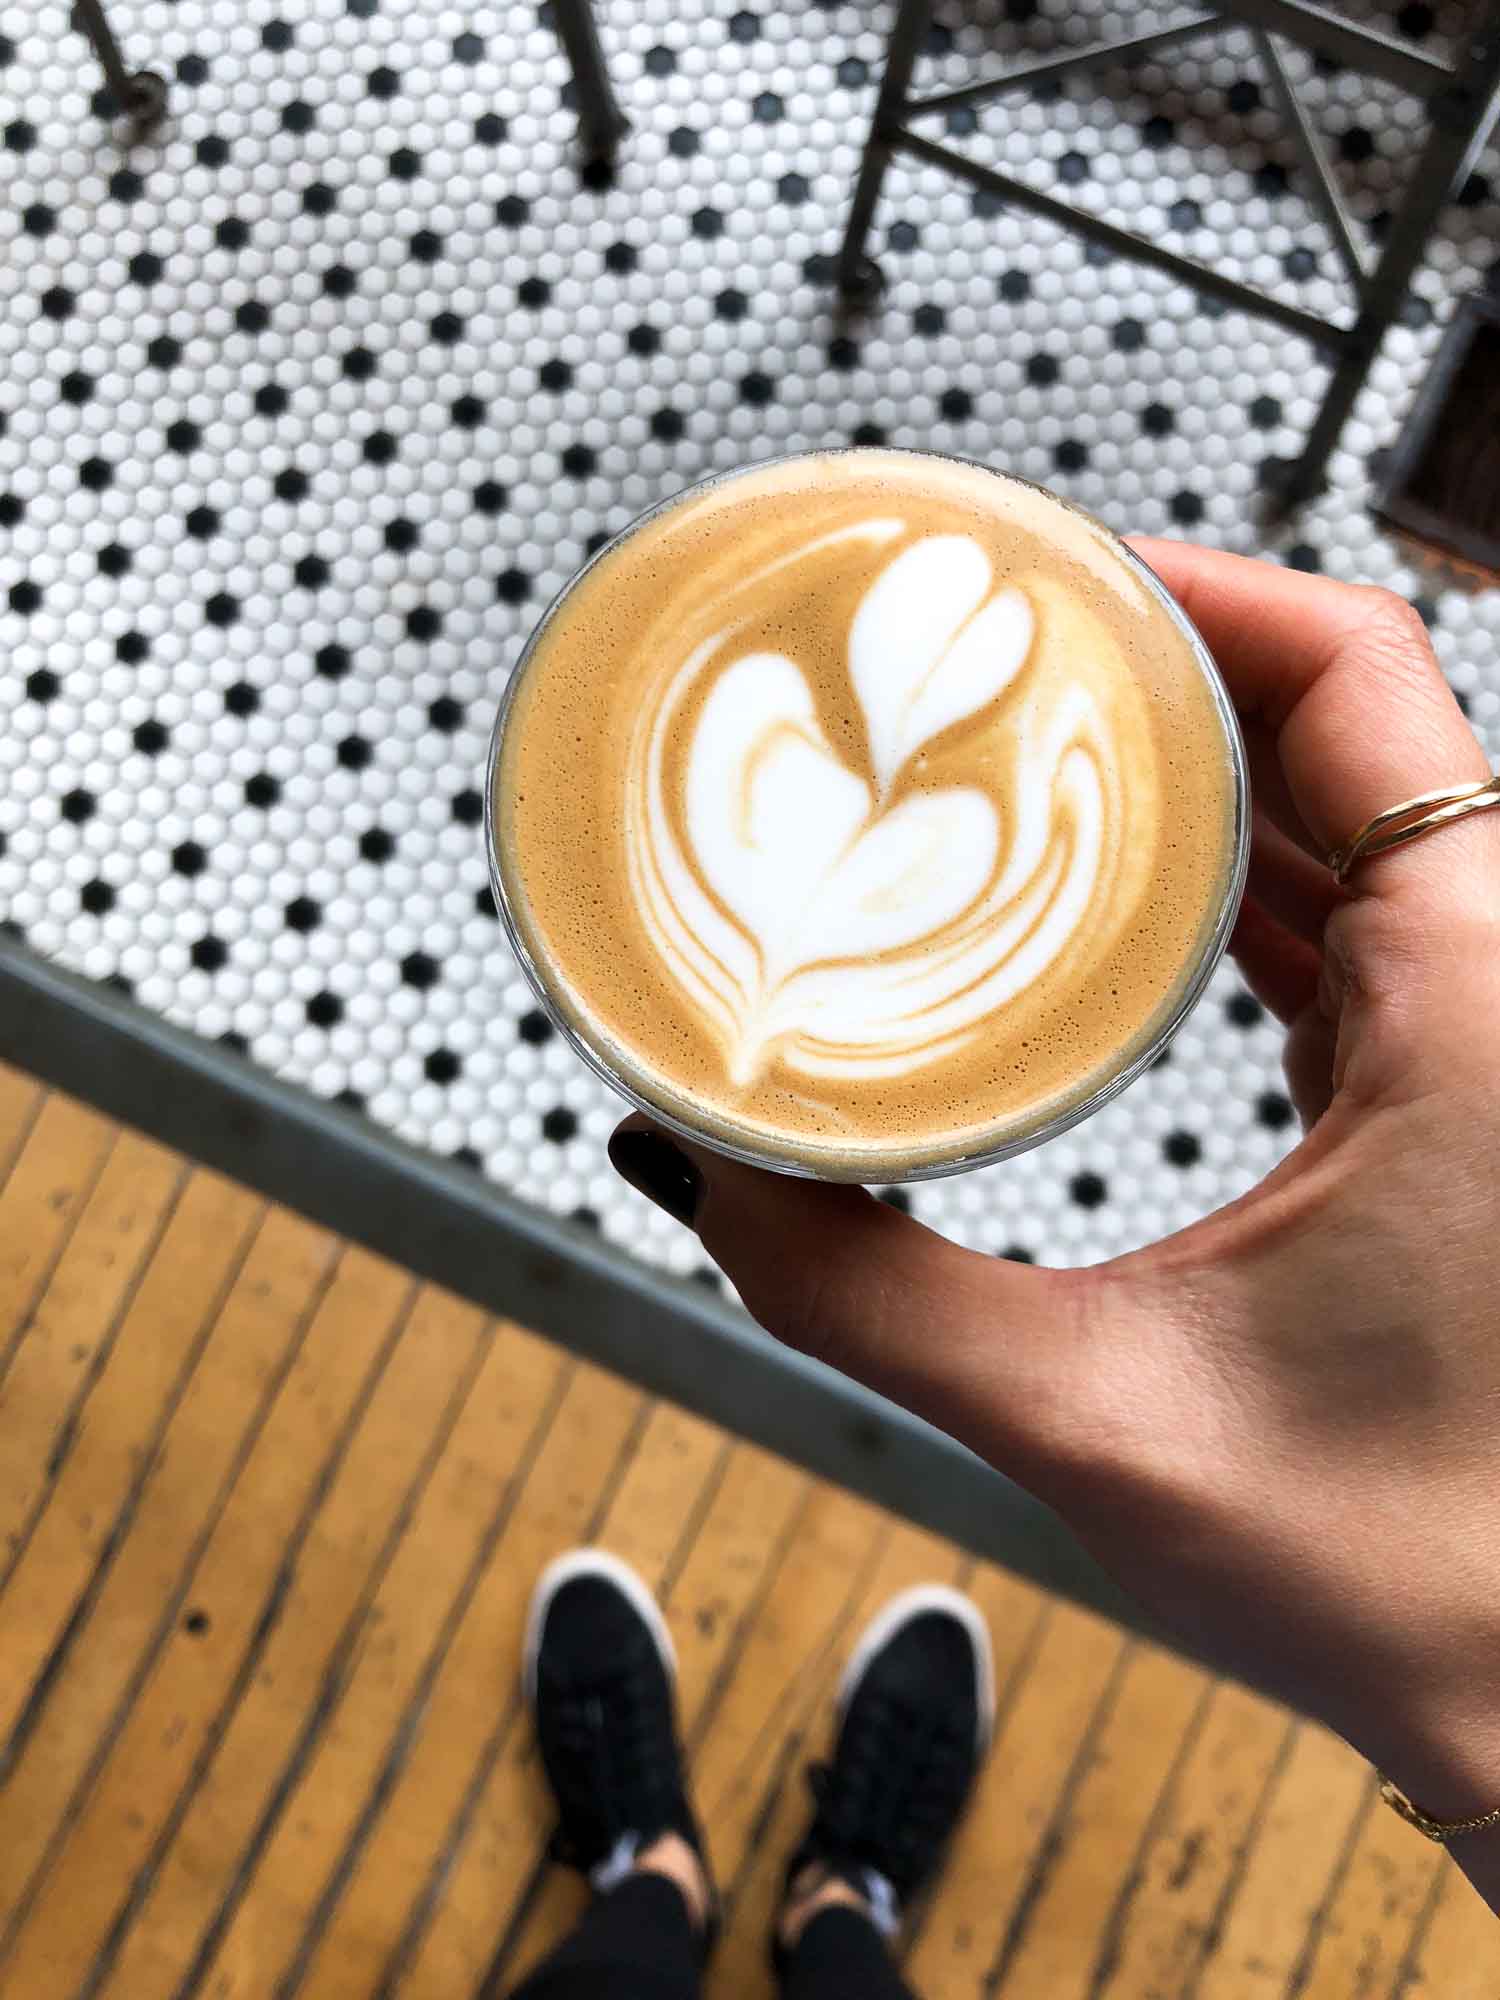 Grand Rapids Travel Guide: Where to get Coffee